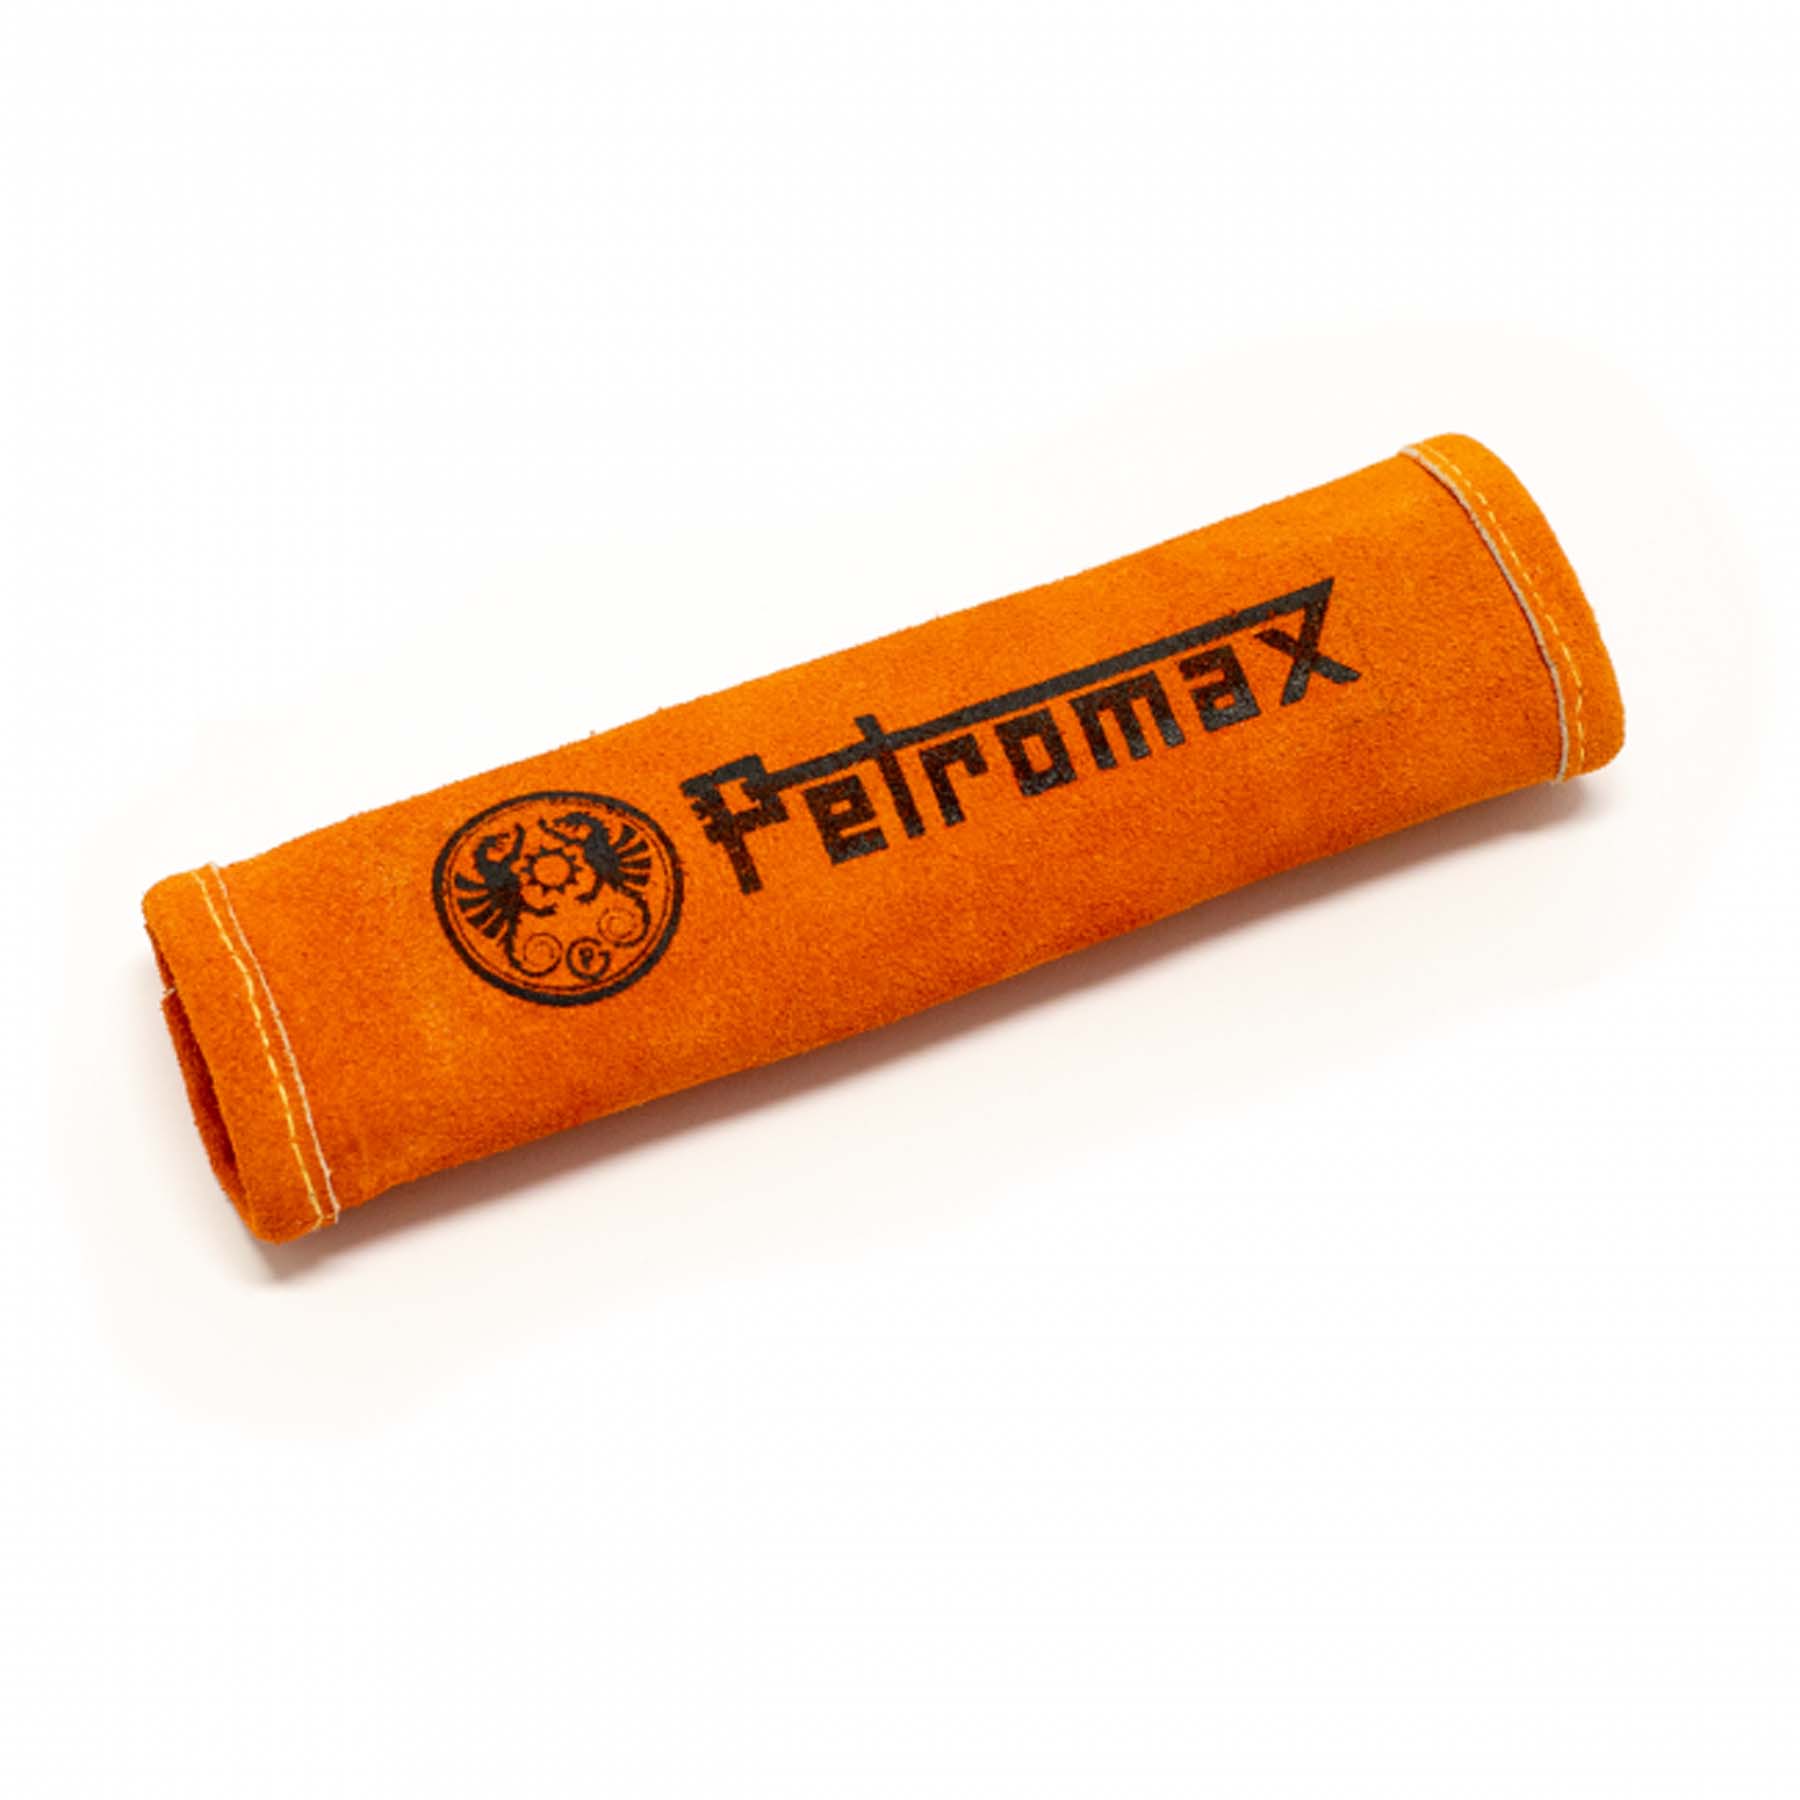 Petromax Aramid handle cover for fire pan